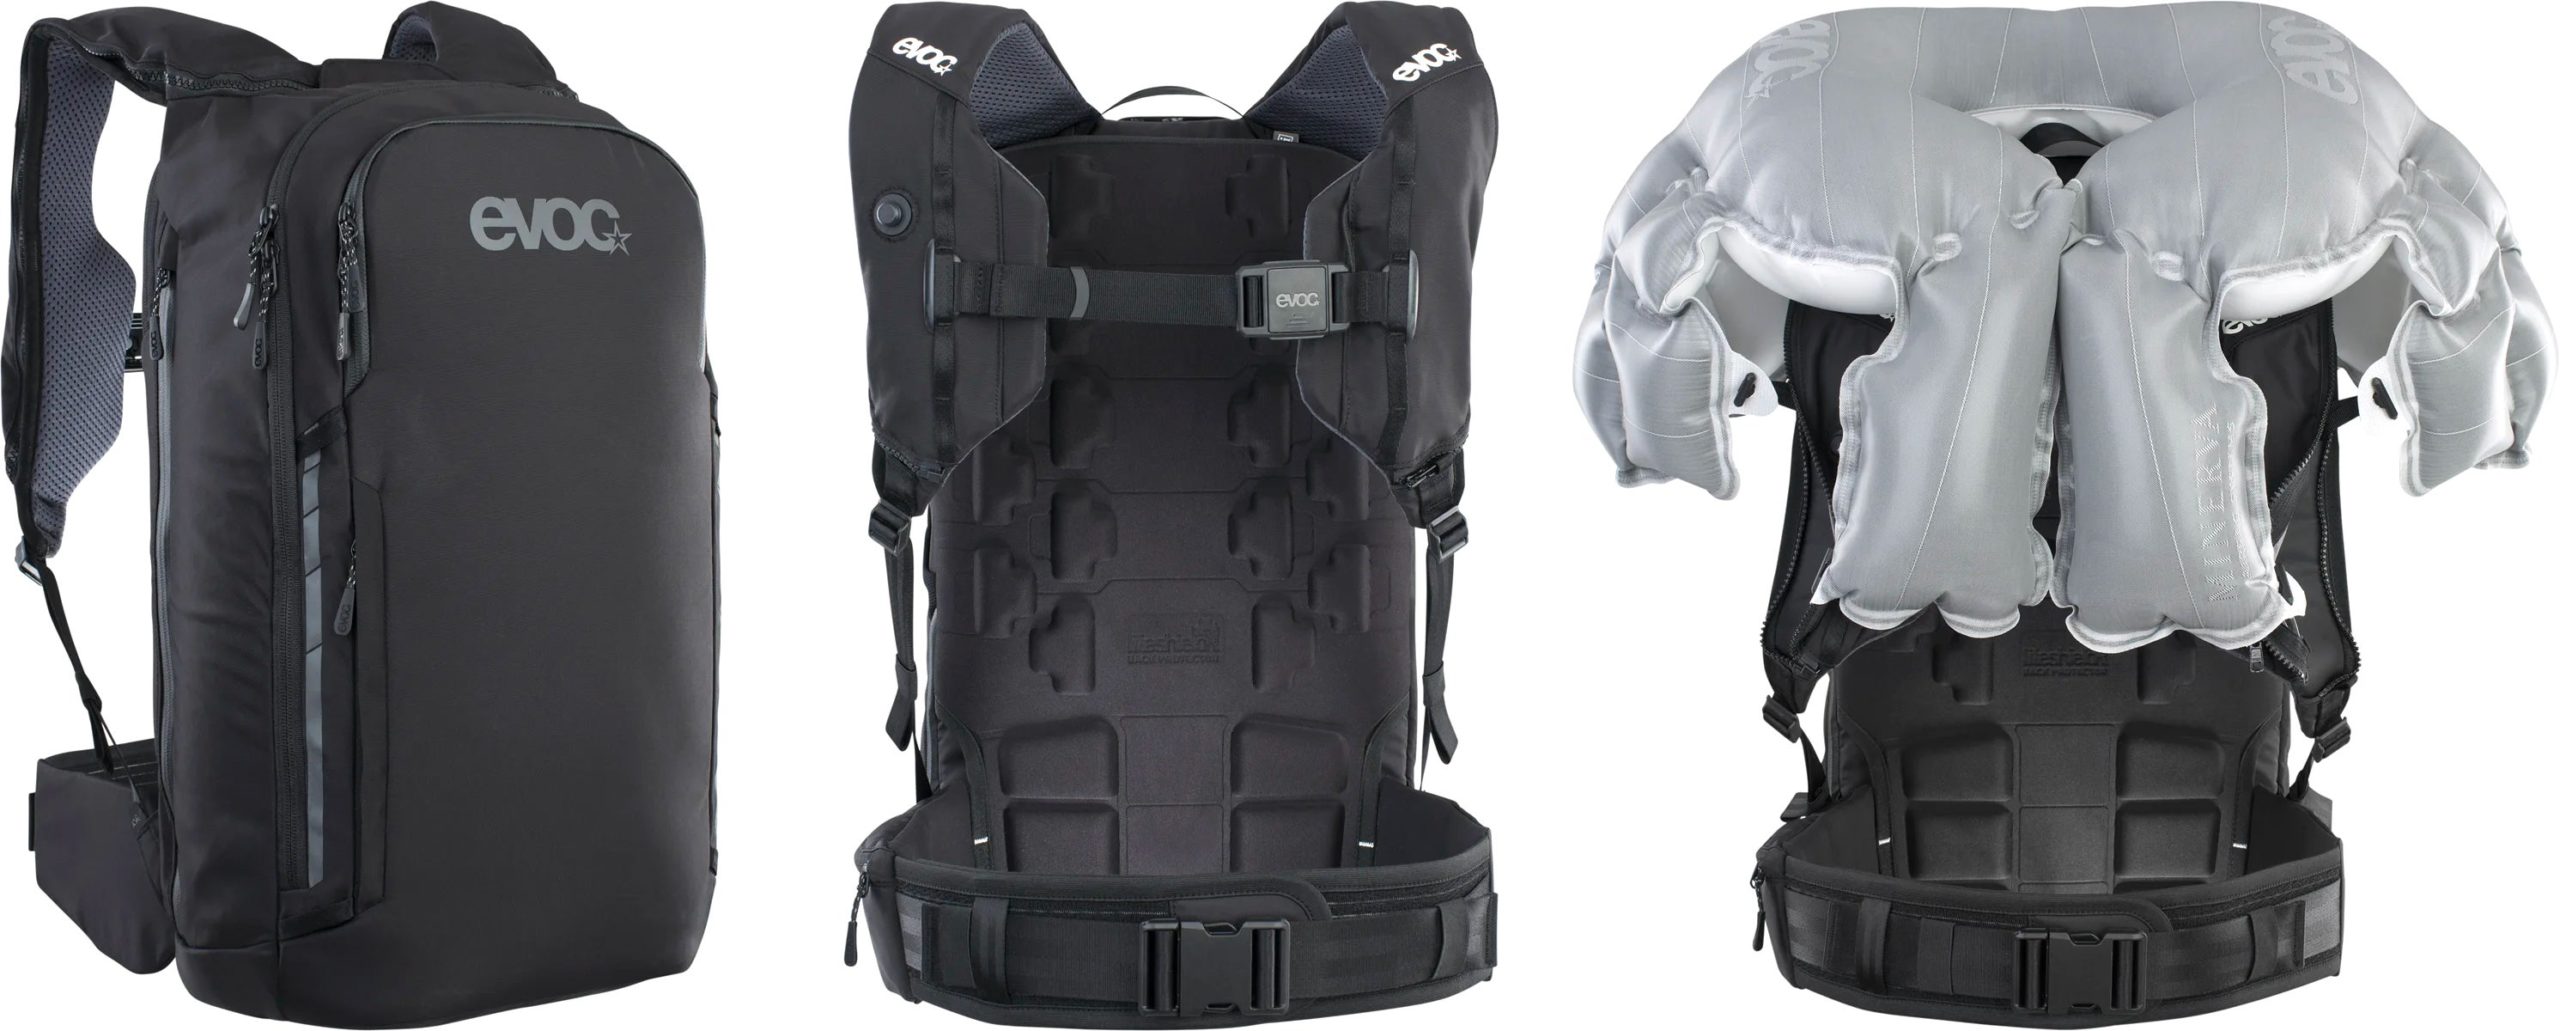 This Backpack Turns Into an Airbag for Your Head